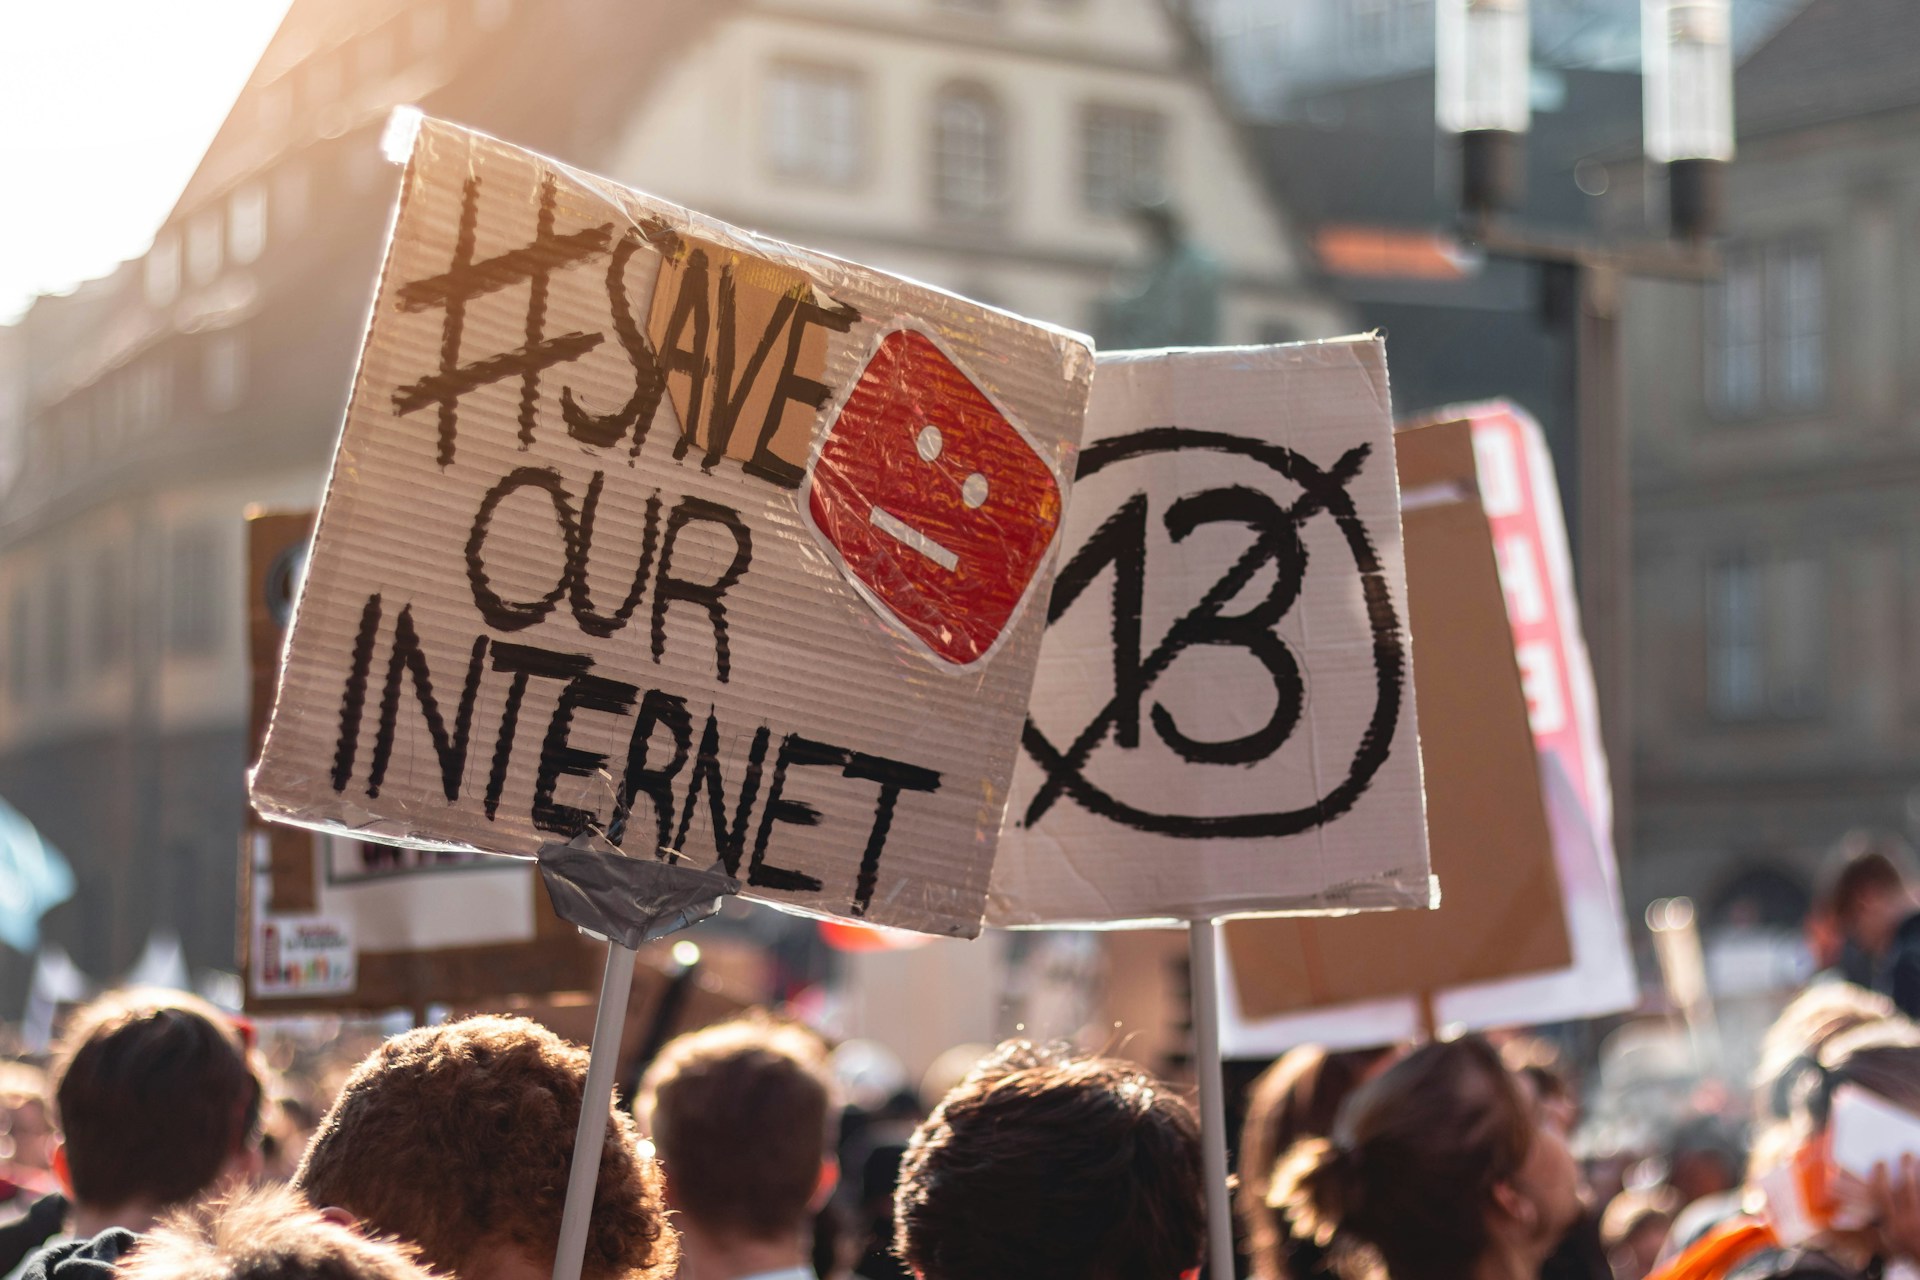 Save our Internet